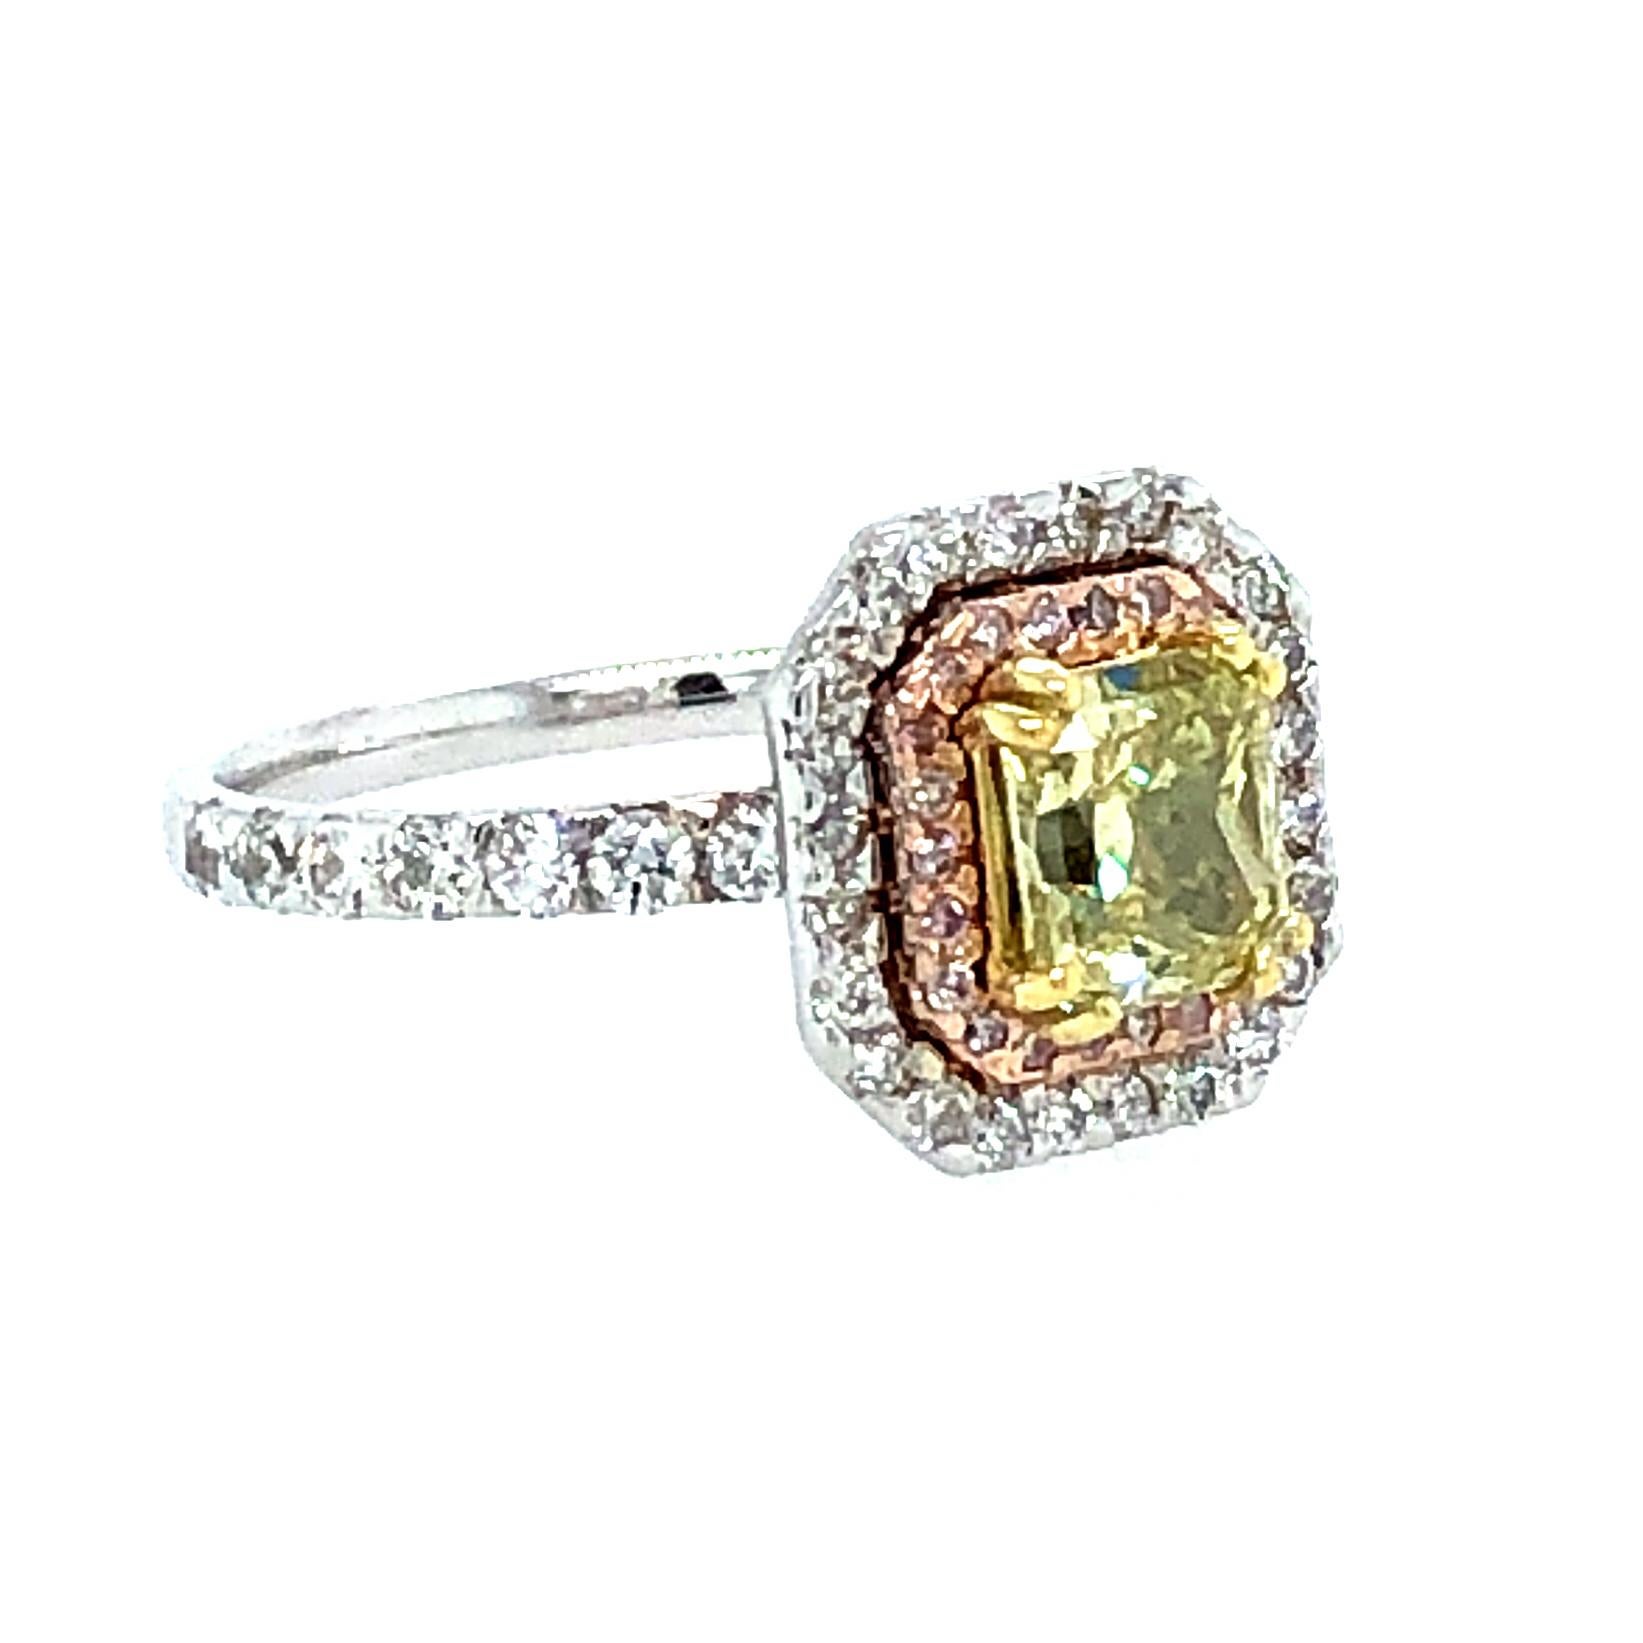 Offered here is a gorgeous GIA certified natural fancy intense yellow radiant cut diamond with natural 
pink and white diamonds set in 18kt white, yellow and rose gold. 
Center diamond GIA report# 2205176067, 1.11 carat fancy intense yellow radiant